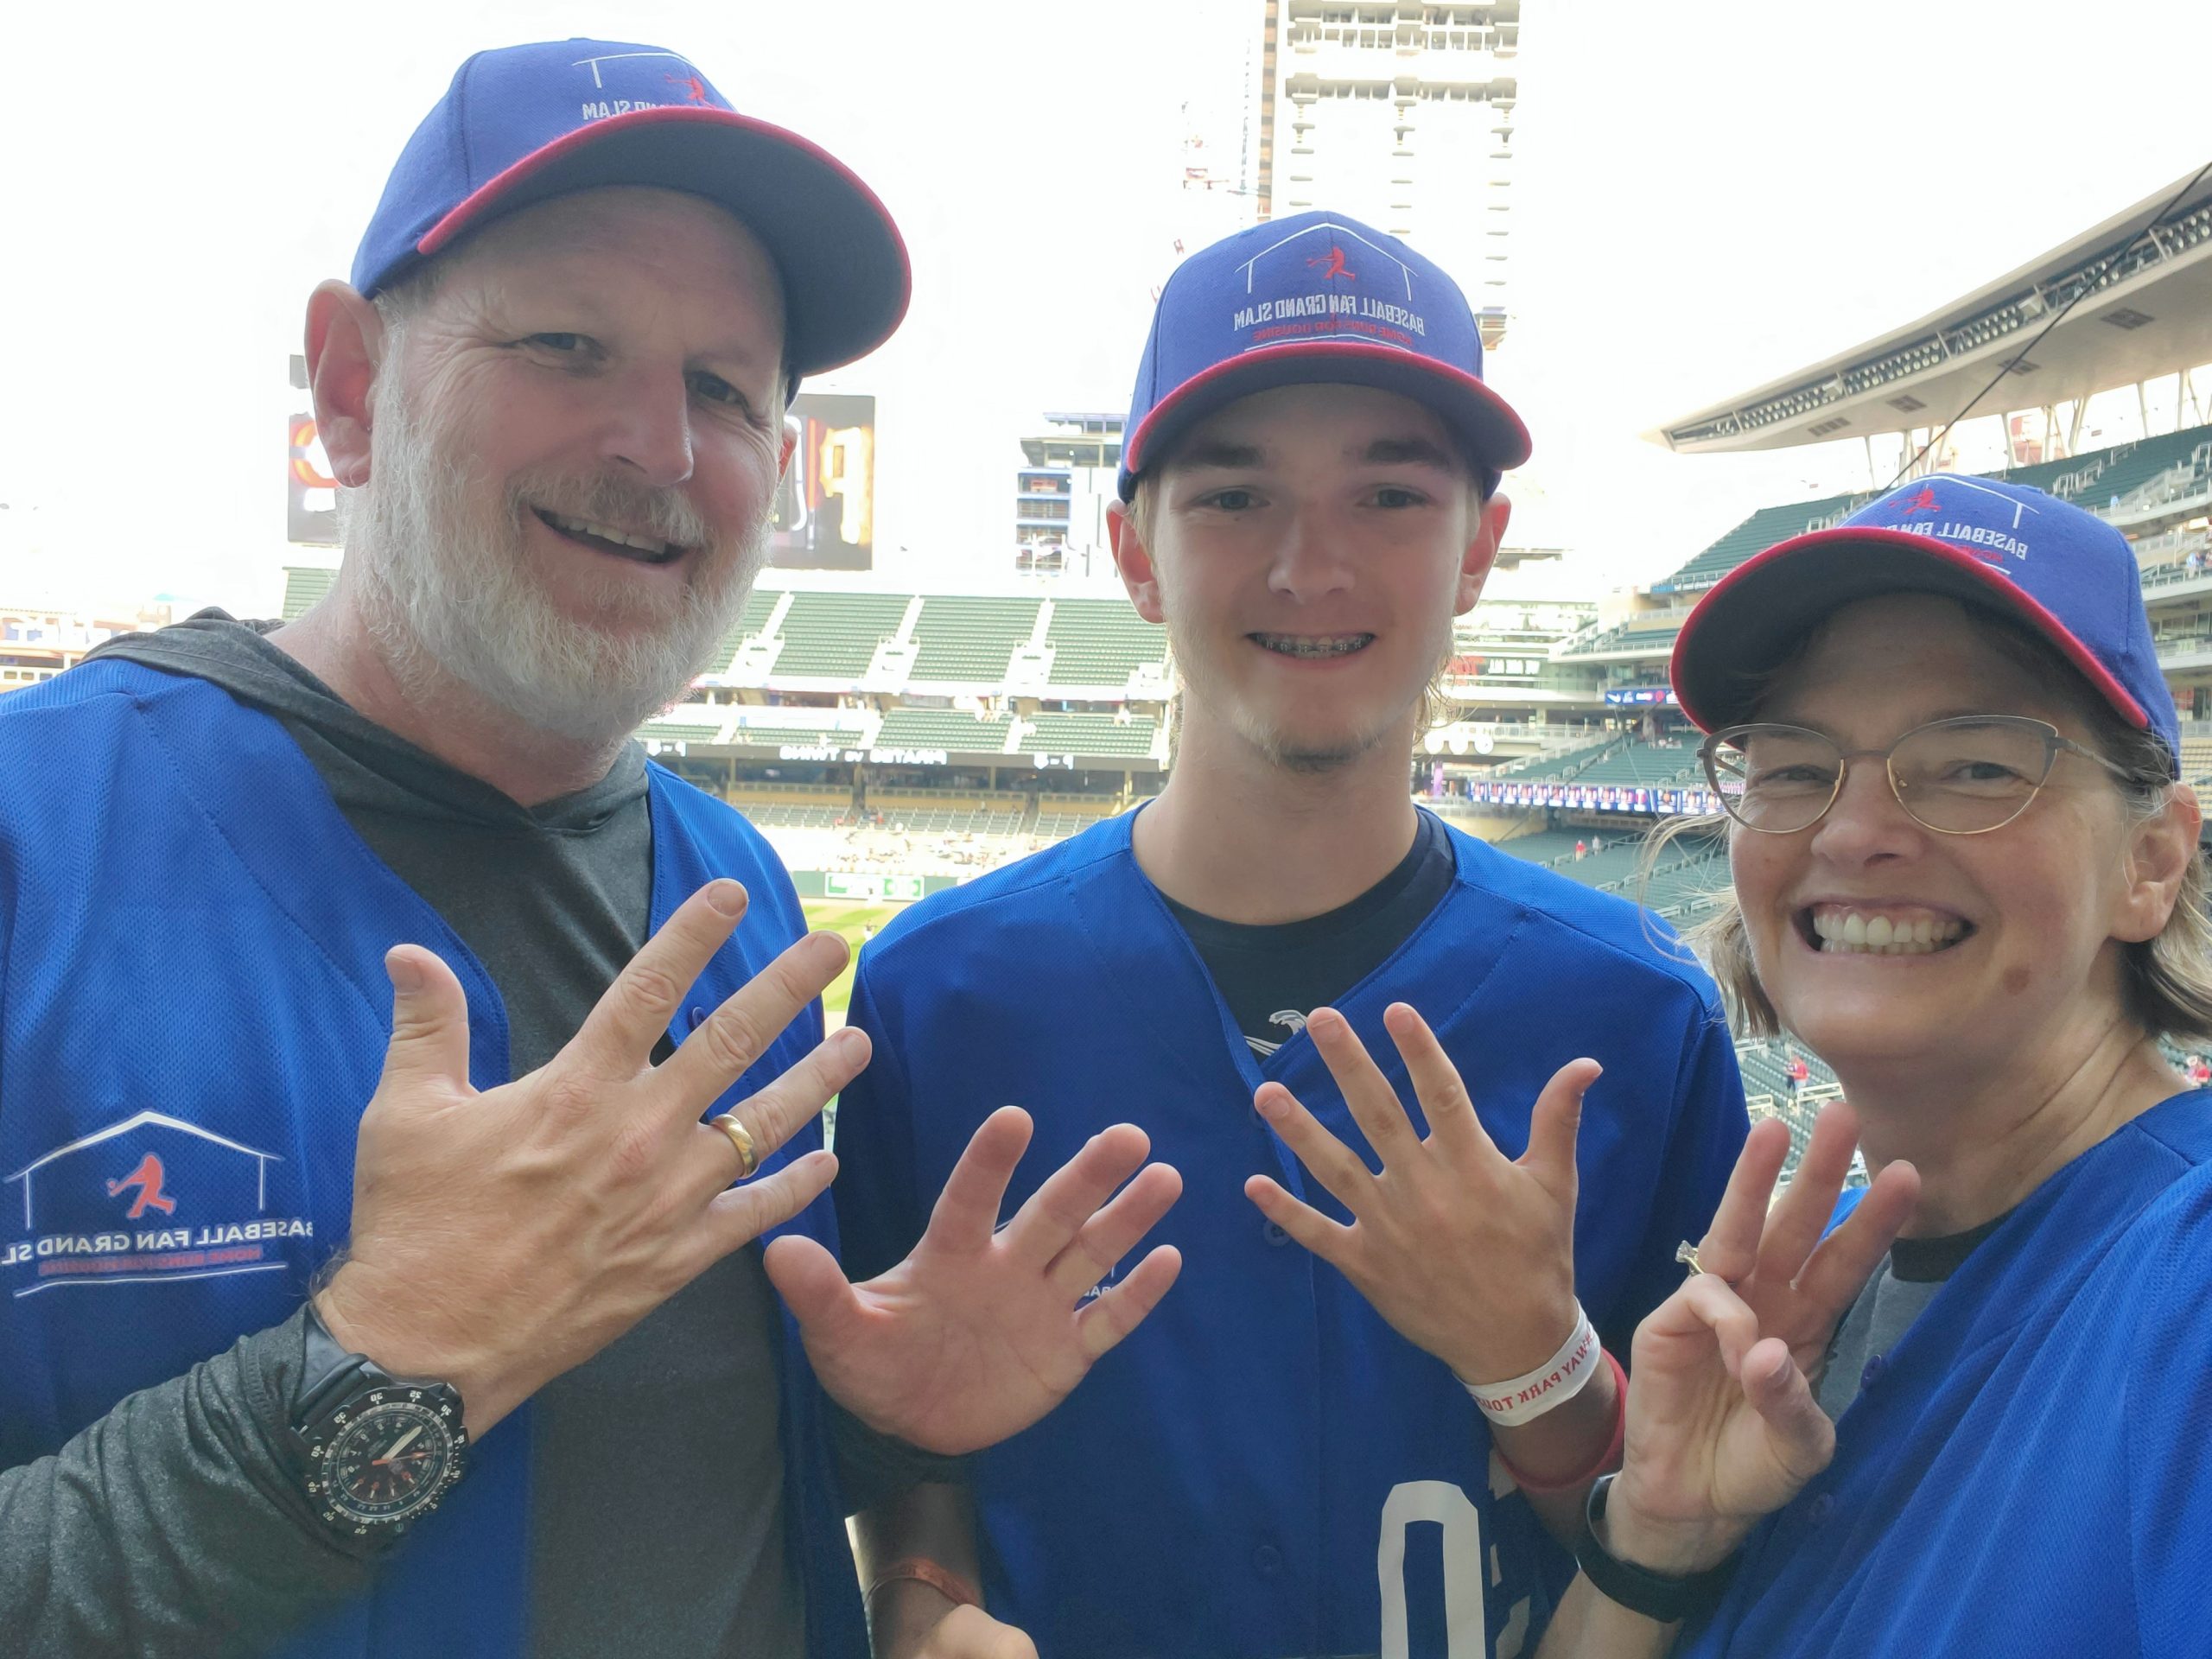 Brad, Heather, Ryan at Target Field holding up 18 fingers.